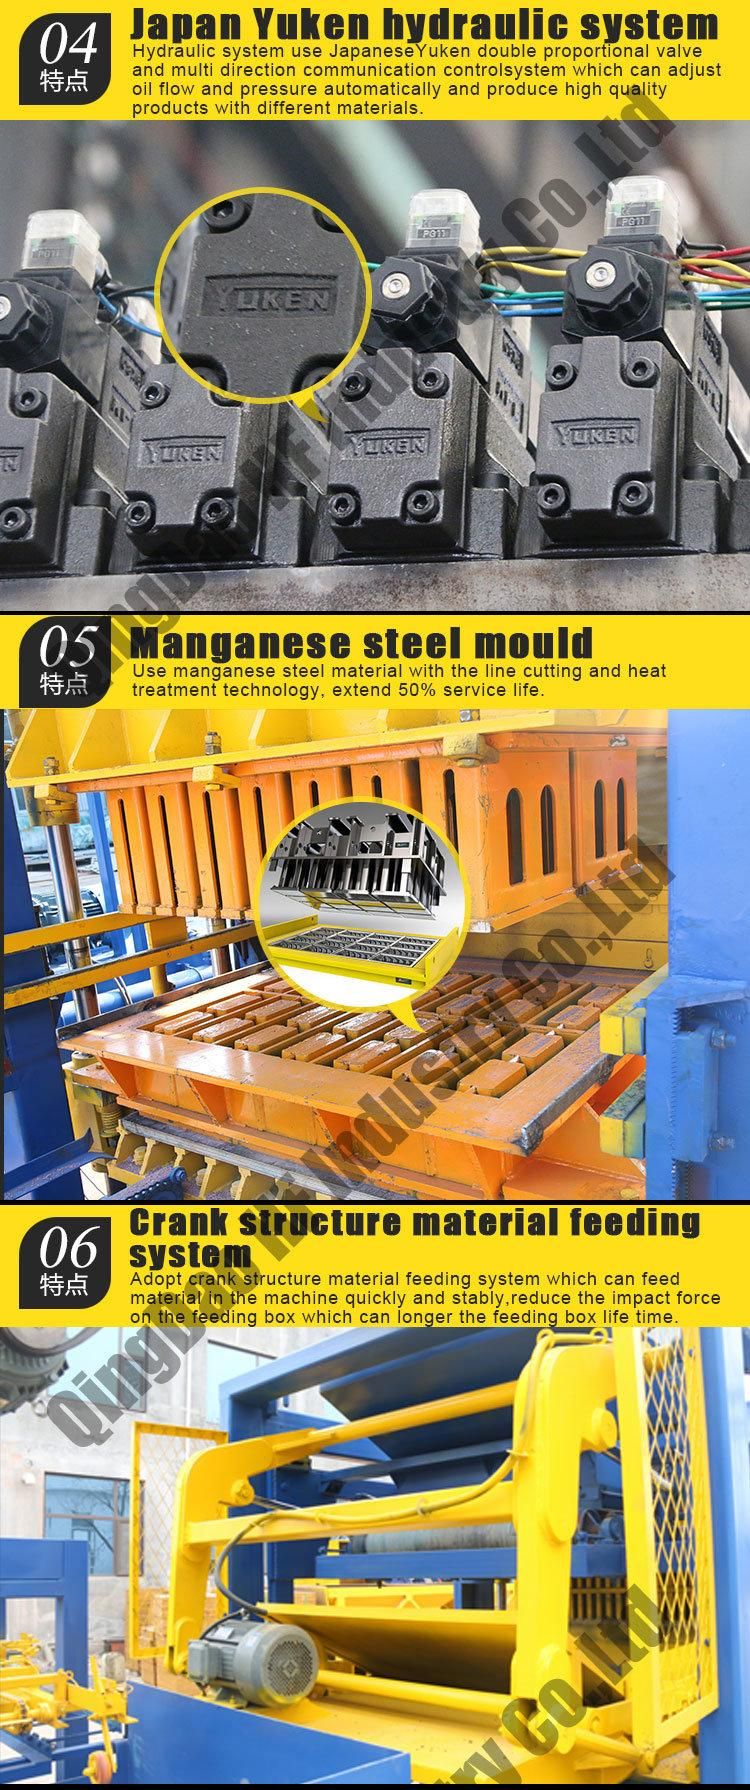 Qt10-15 Types of Bricks Making Machine Used in Construction